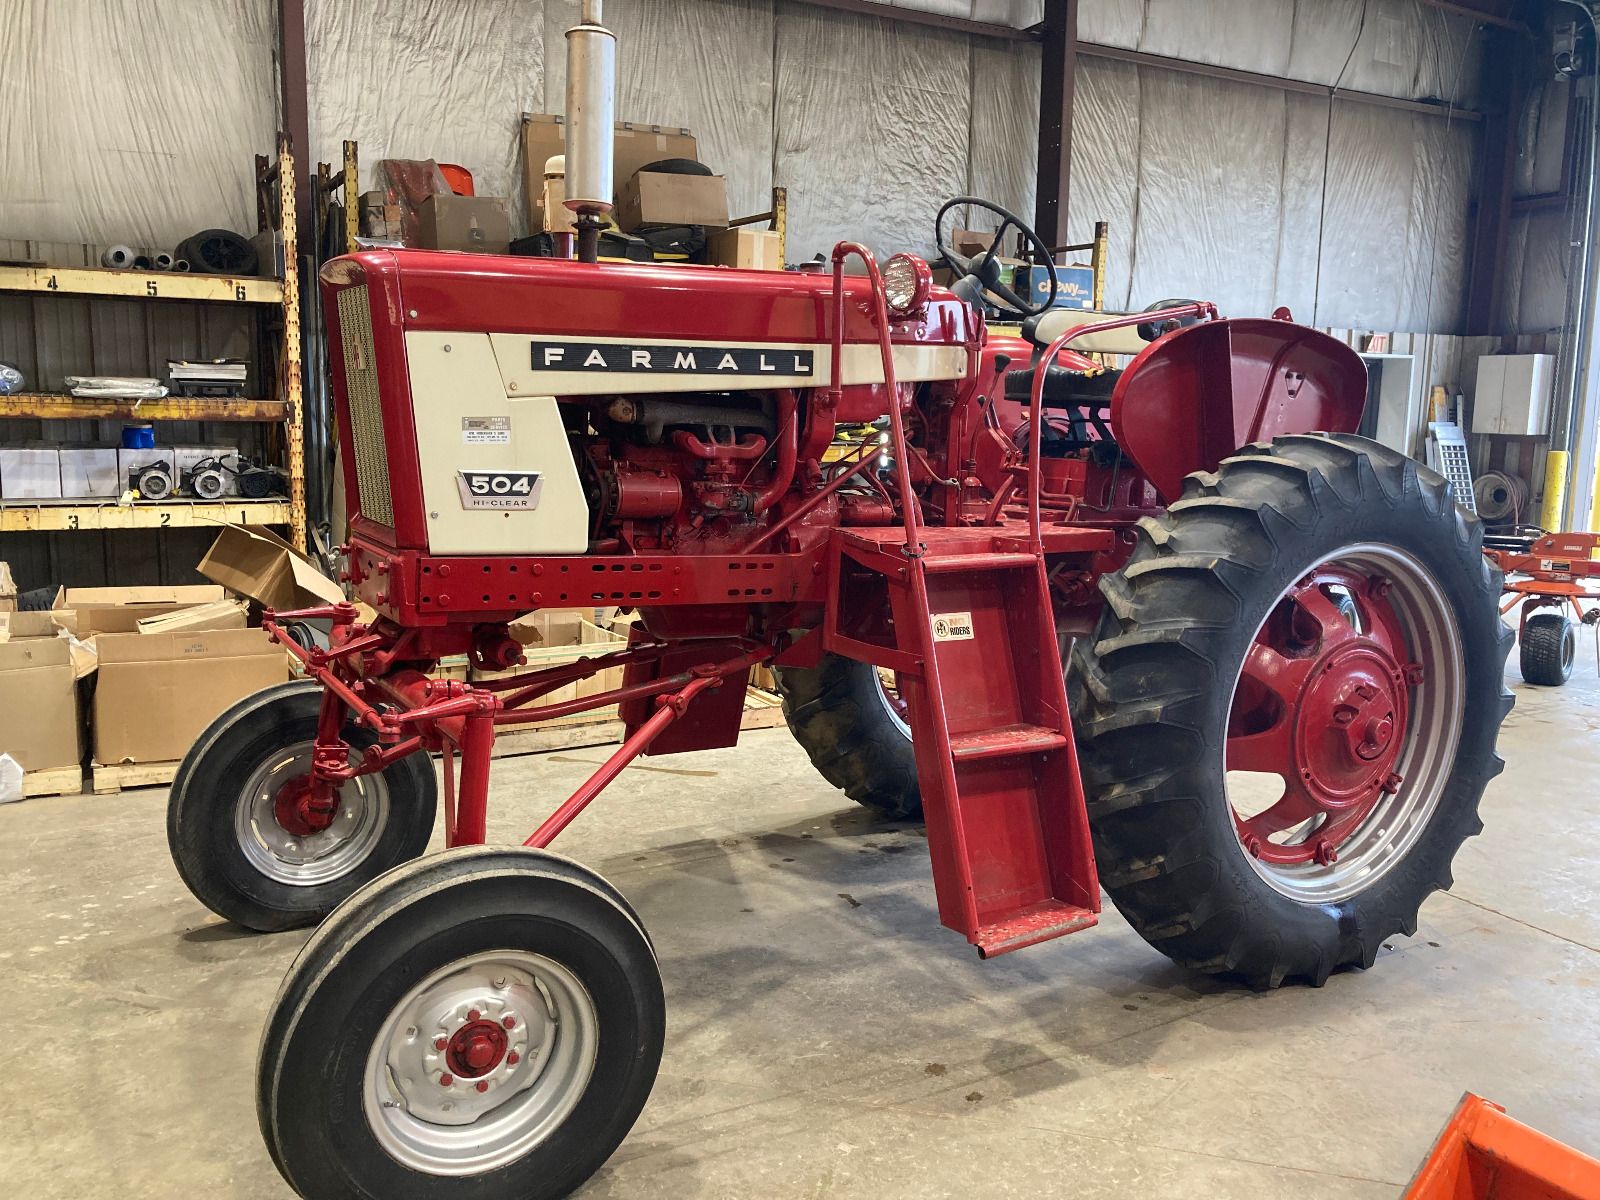 Farmall Tractor Parts - 5,000+ In Stock | Wengers®